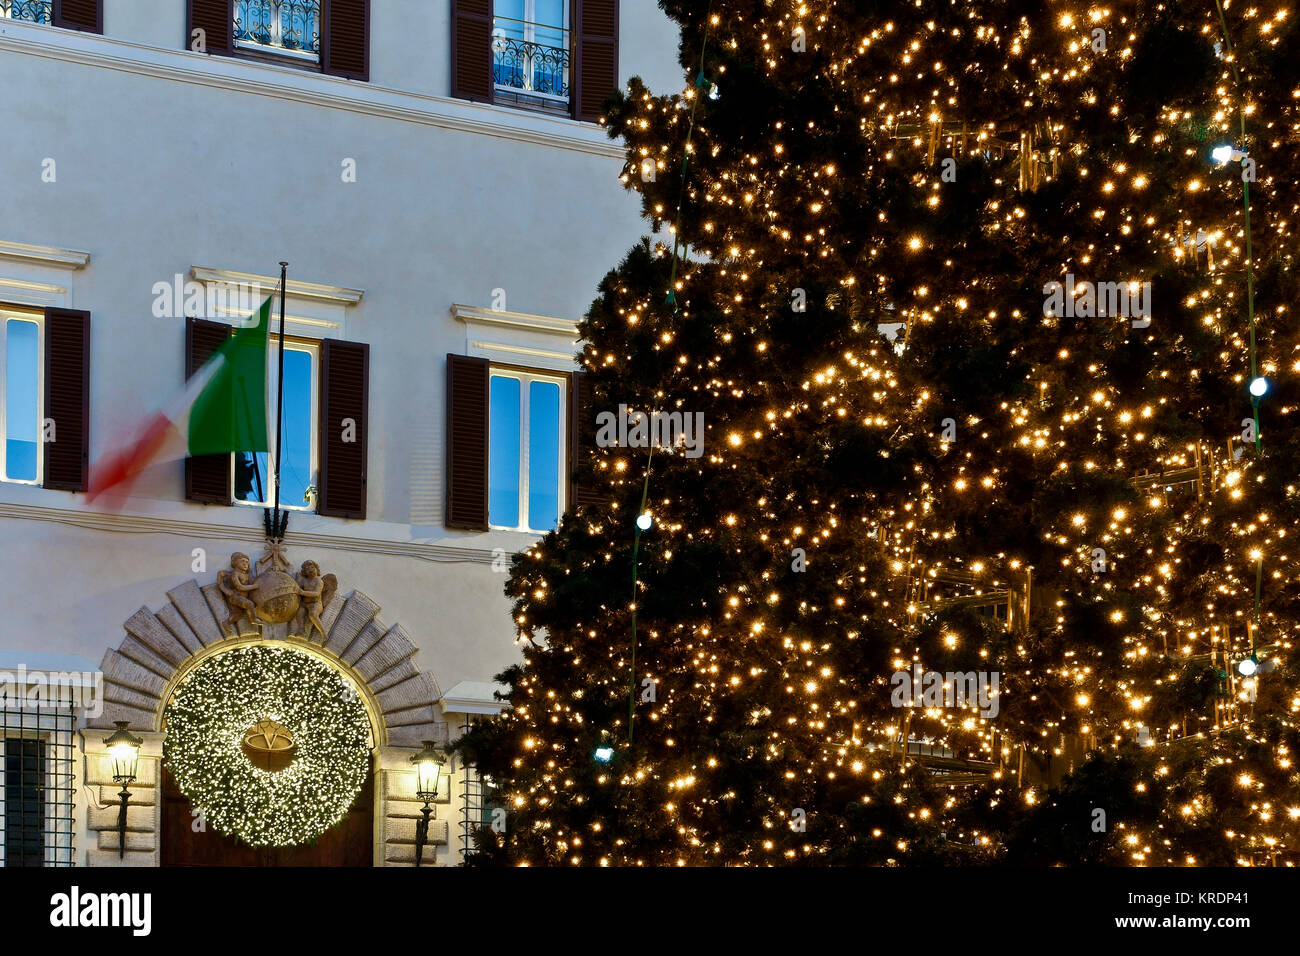 Rome Christmas led lights tree decorations, 'Valentino' palace entrance. Italy, Europe, EU. Christmas time. Low angle view, close up. Luxury shopping. Stock Photo